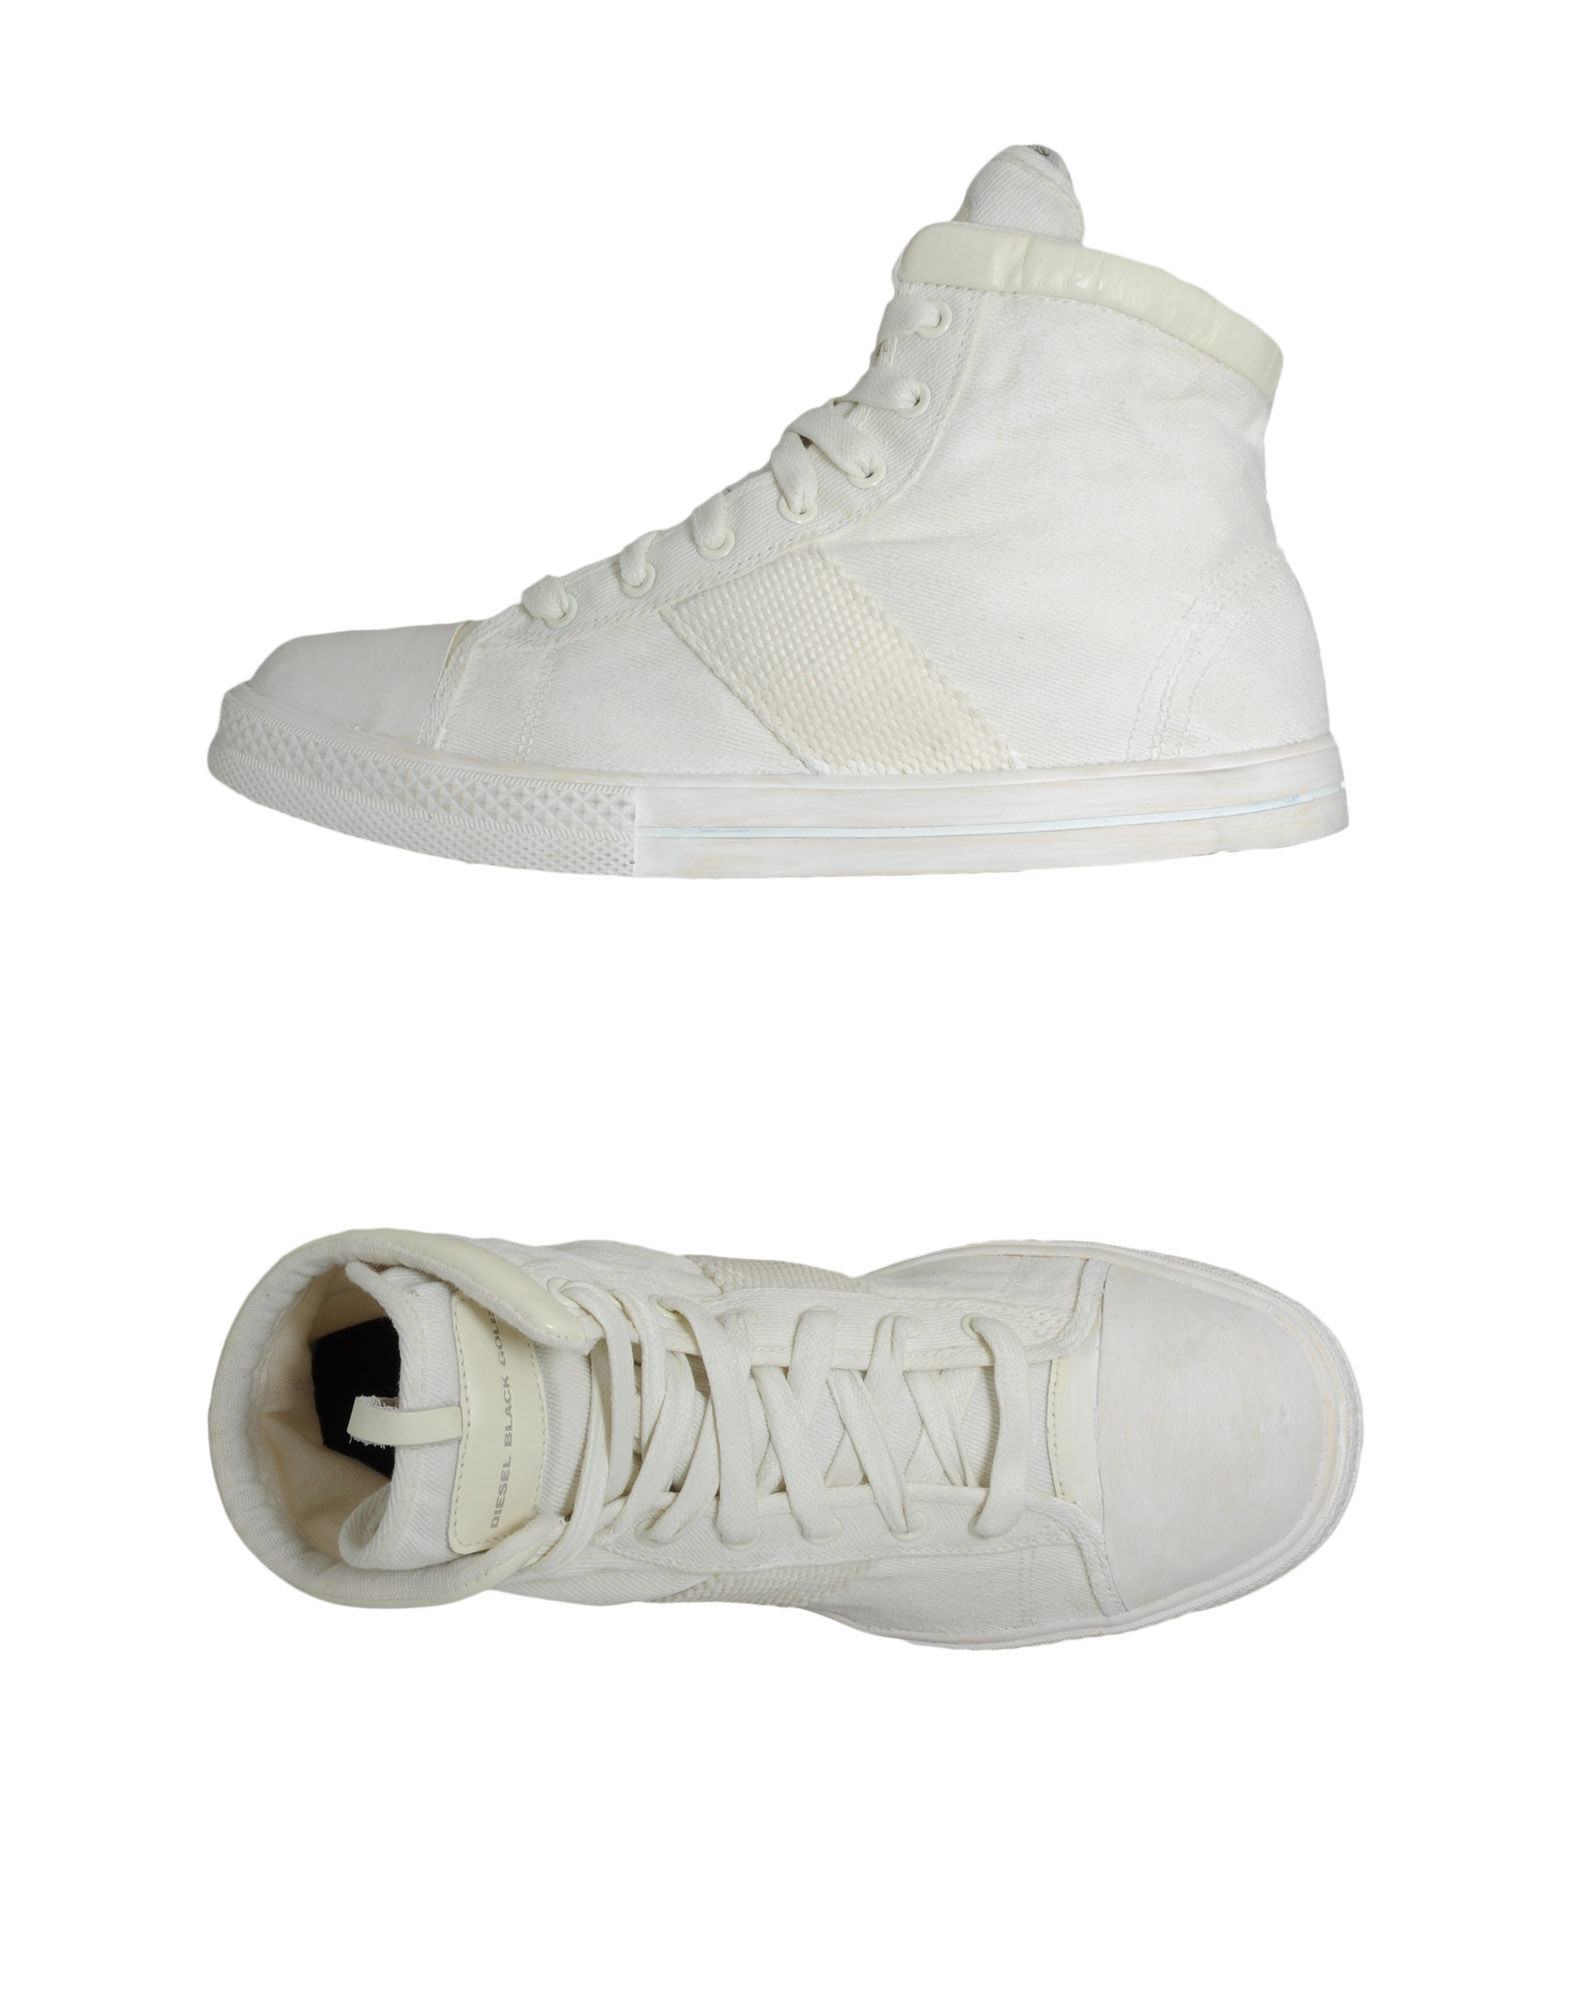 diesel-black-gold-white-high-tops-trainers-hi-top-sneakers-product-1 ...